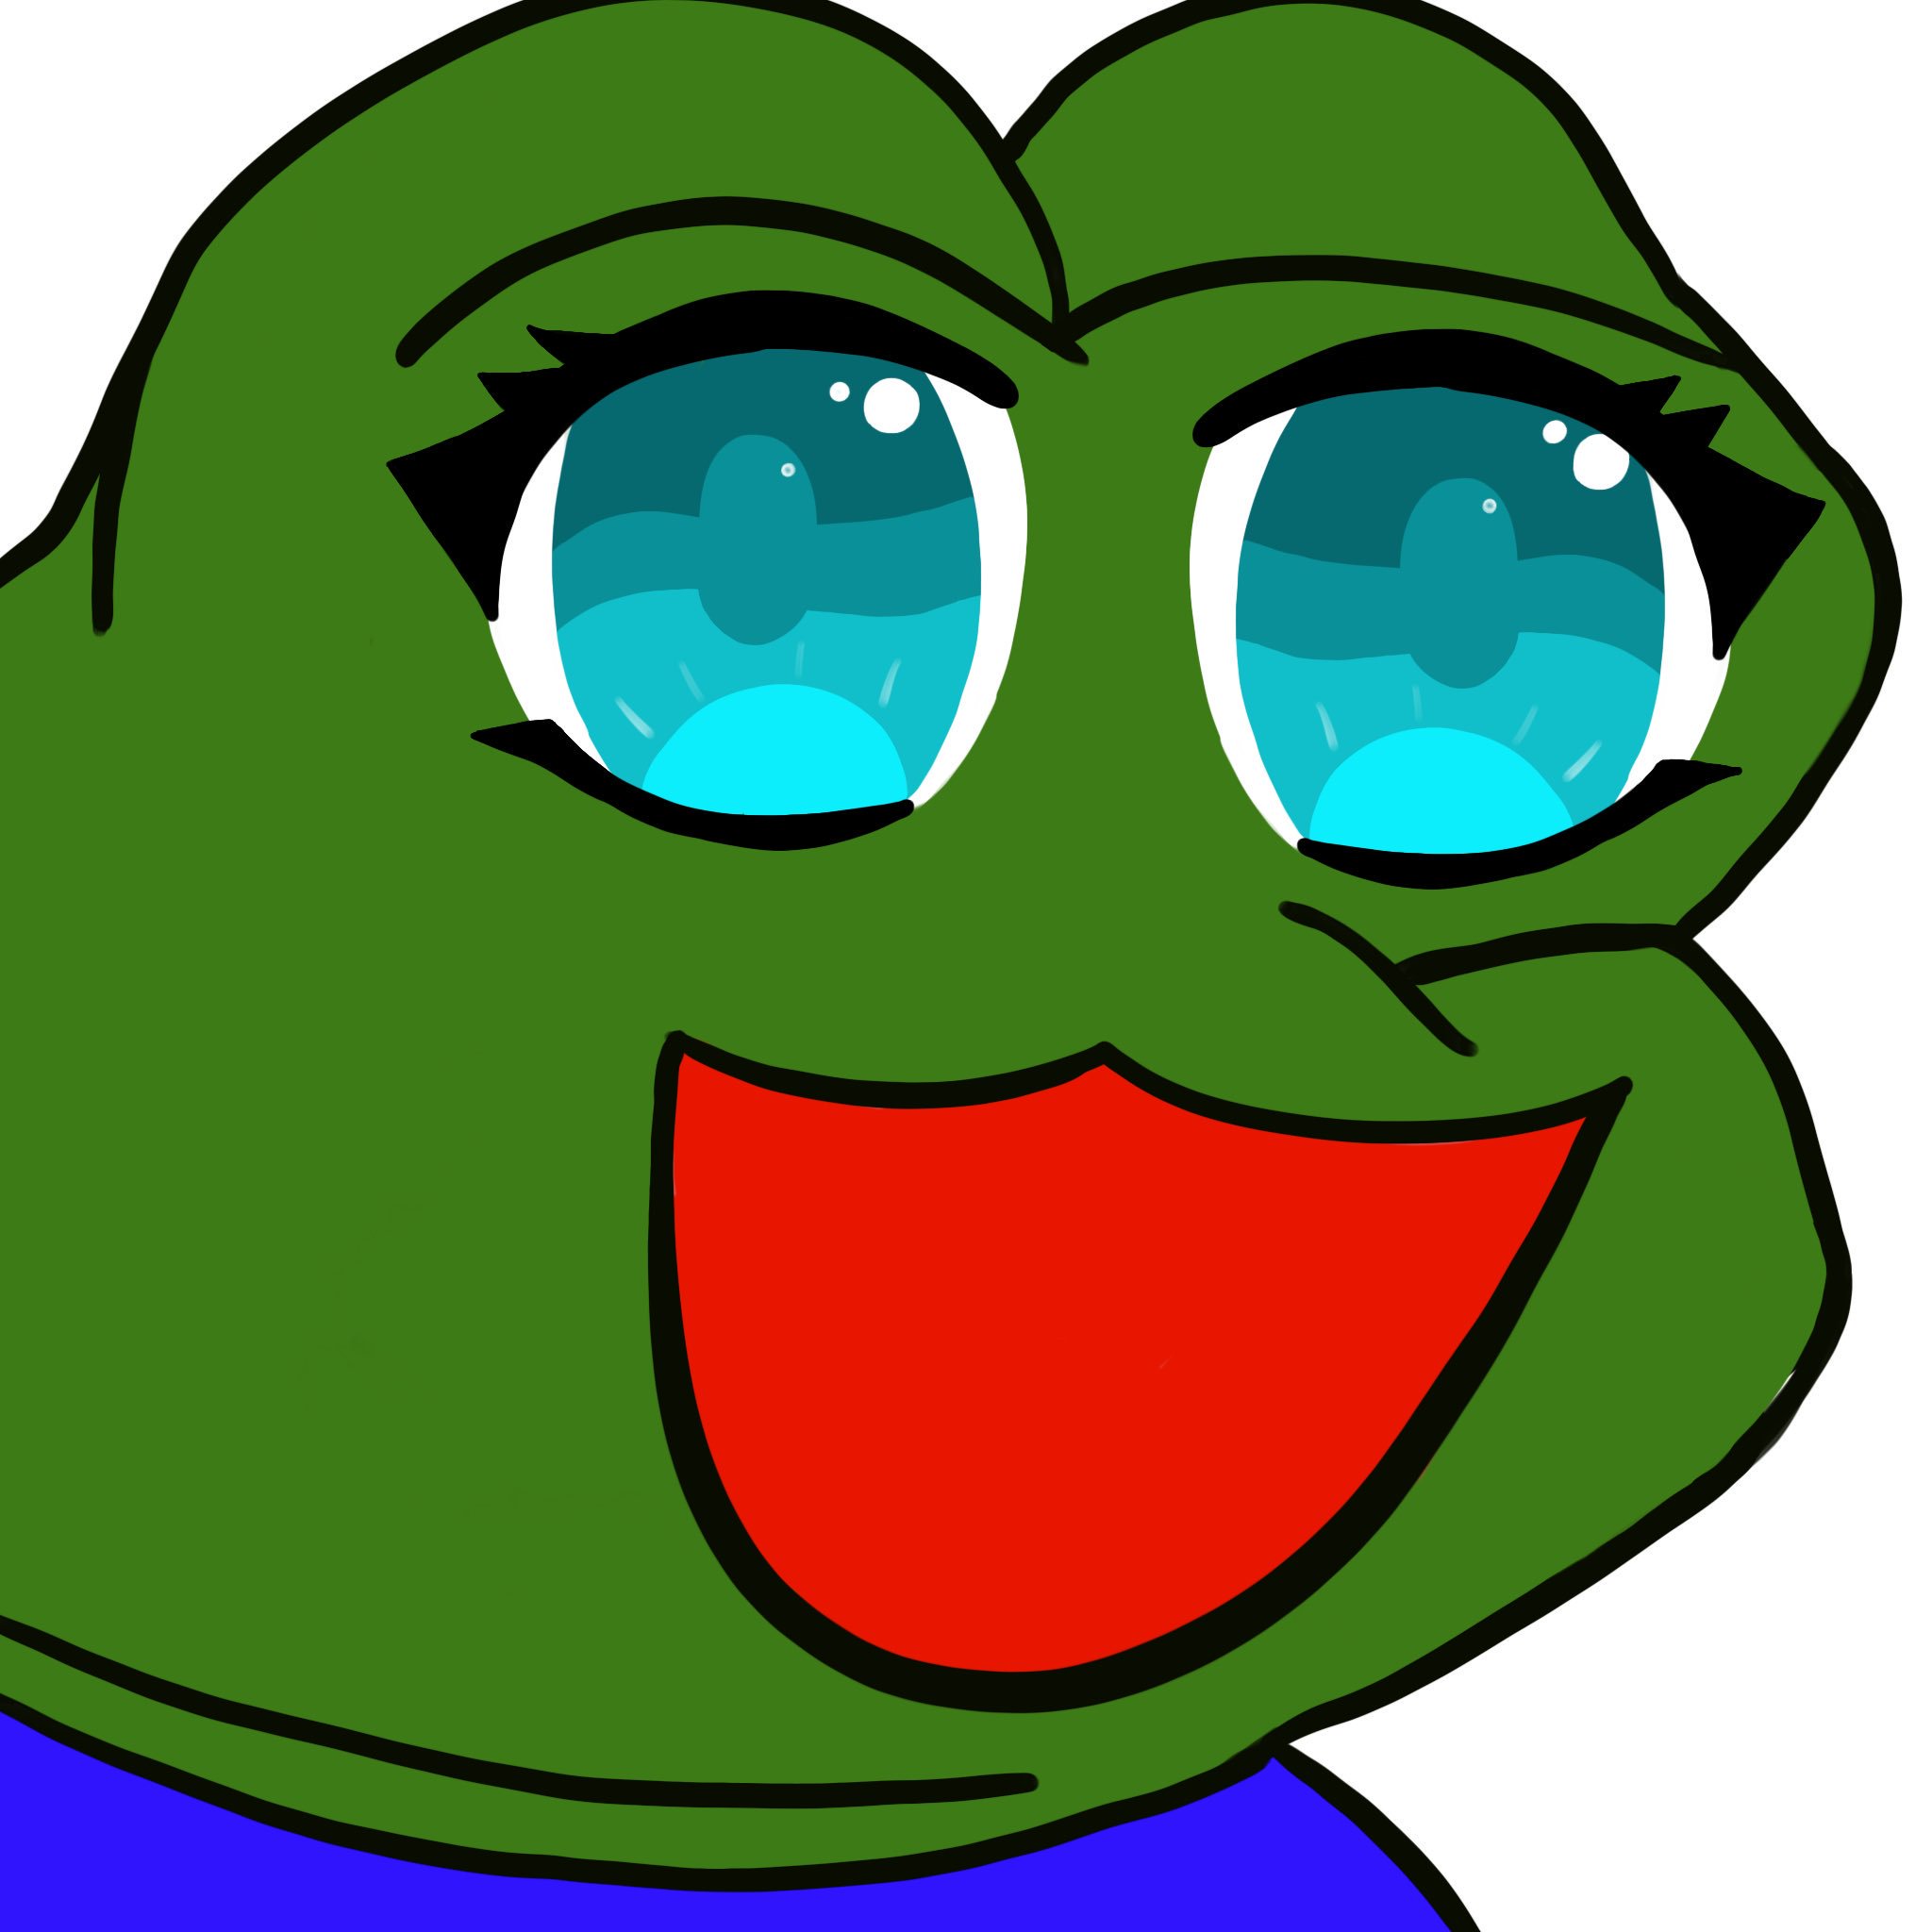 The MonkaS emote is mostly used on the streaming platform Twitch and is alw...